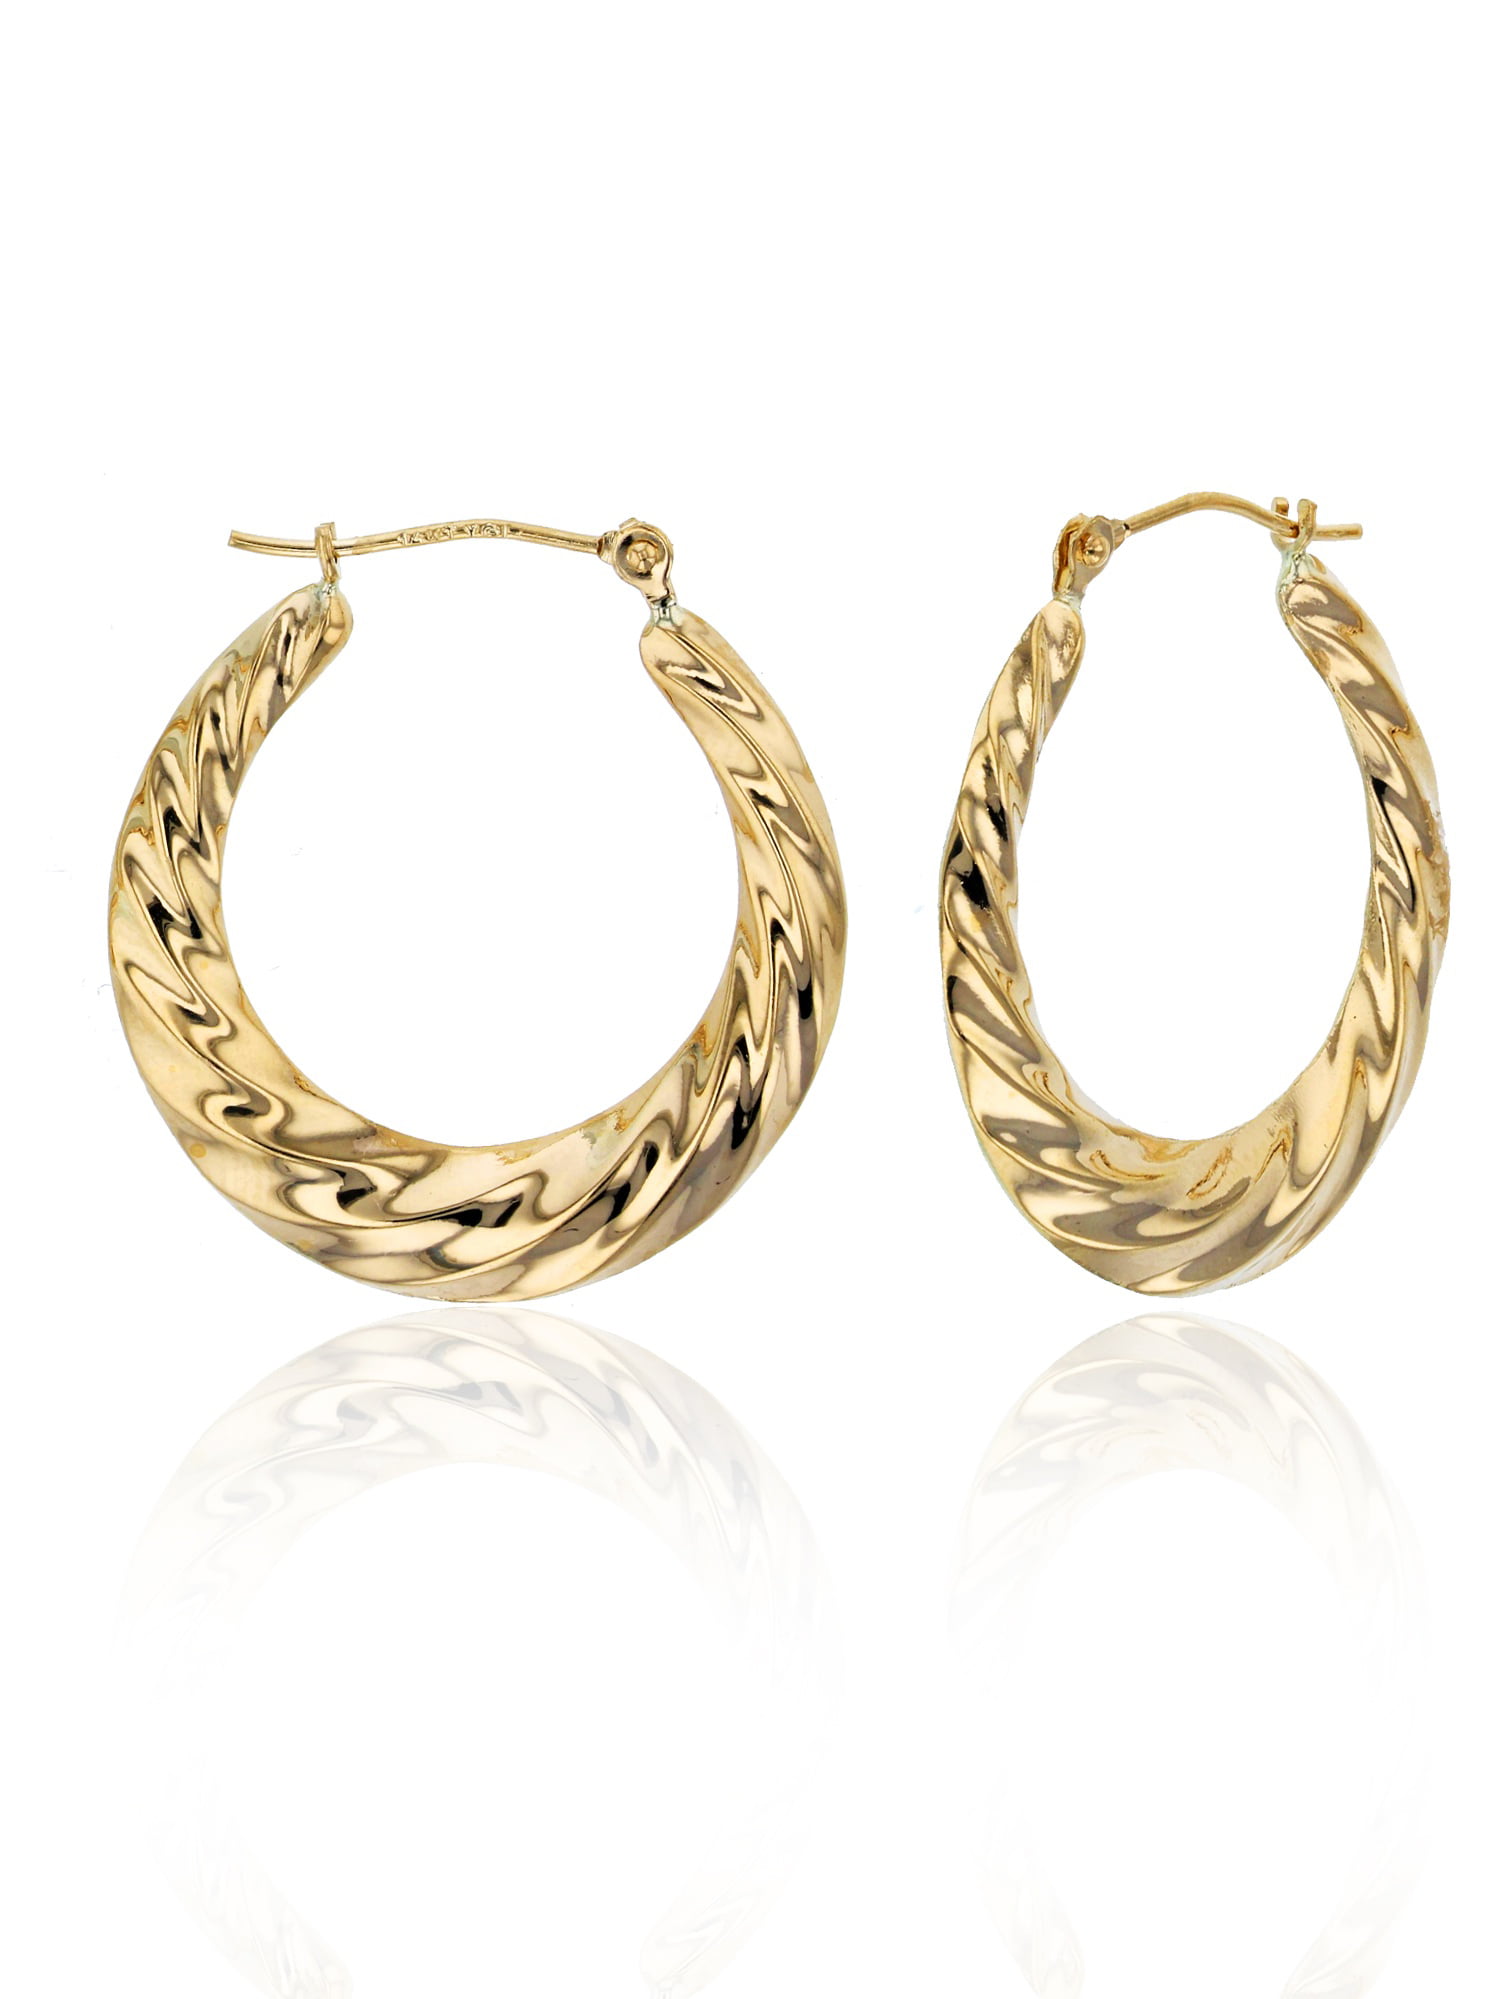 Decadence - 14K Gold Thick Round Hoop Earrings with Hinged Clasp For